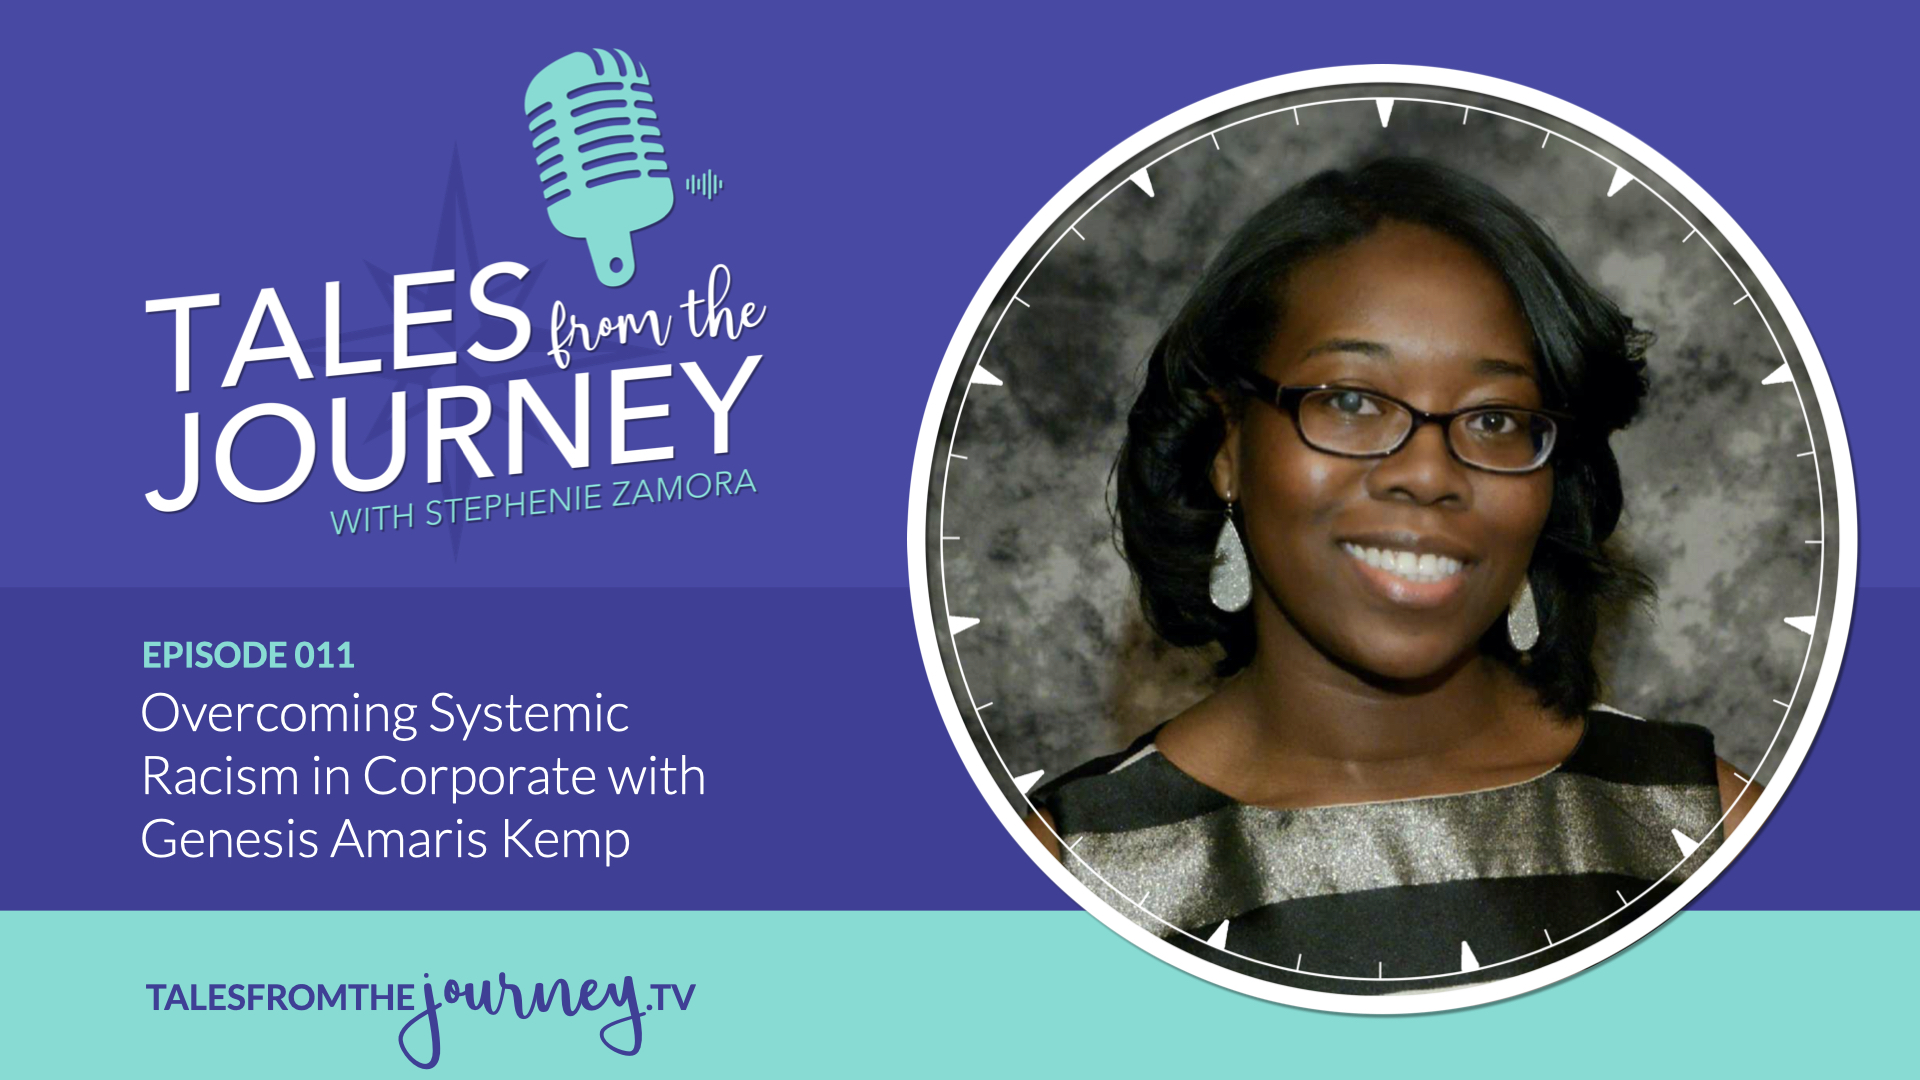 Overcoming Systemic Racism in Corporate with Genesis Amaris Kemp